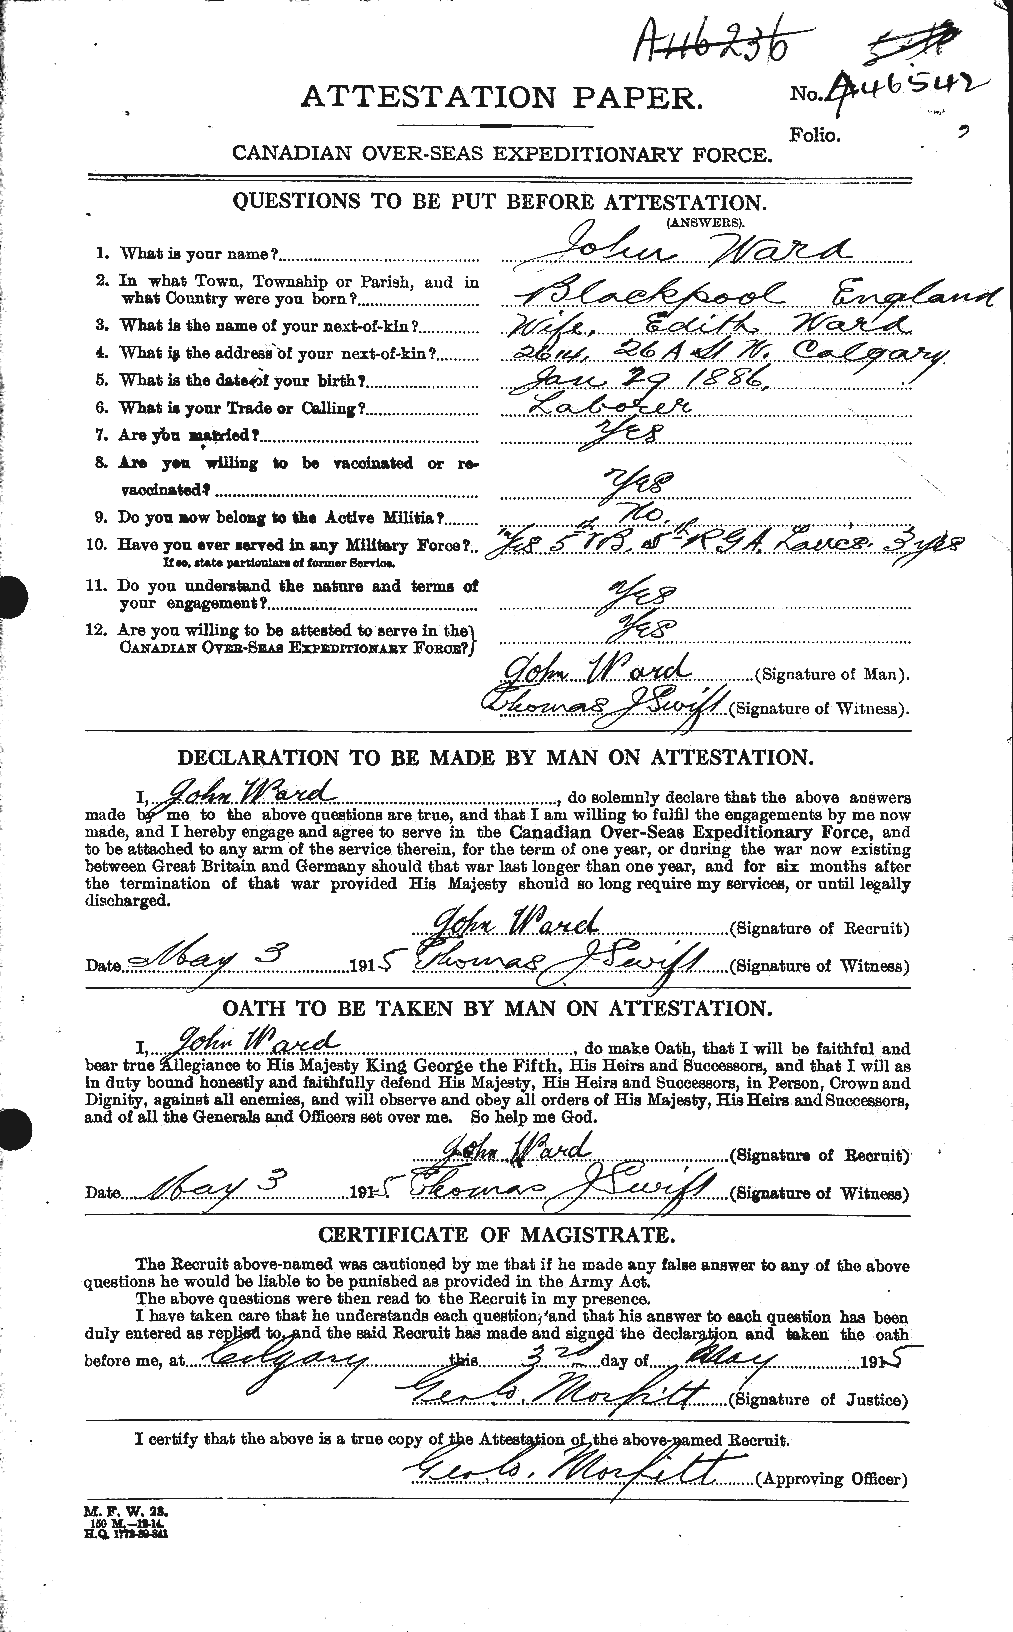 Personnel Records of the First World War - CEF 659507a